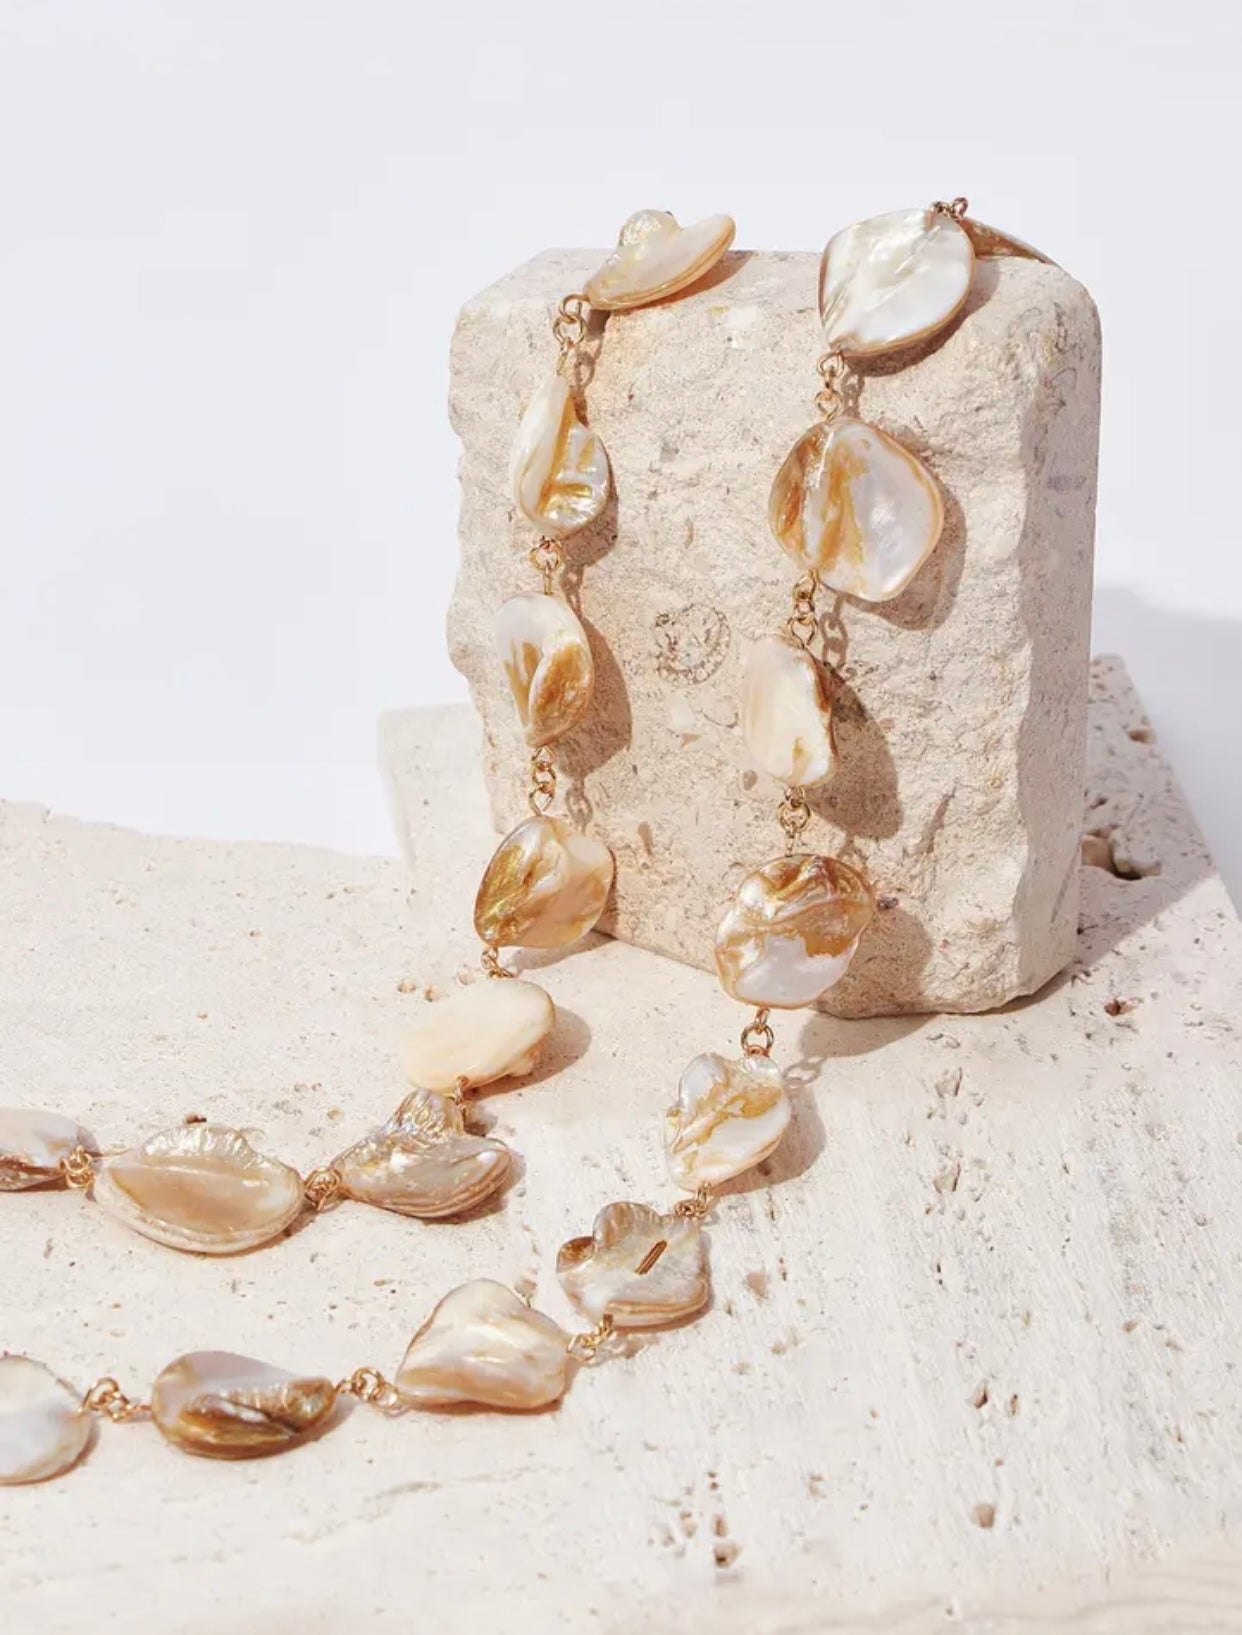 Lailani Natural Shell Necklace